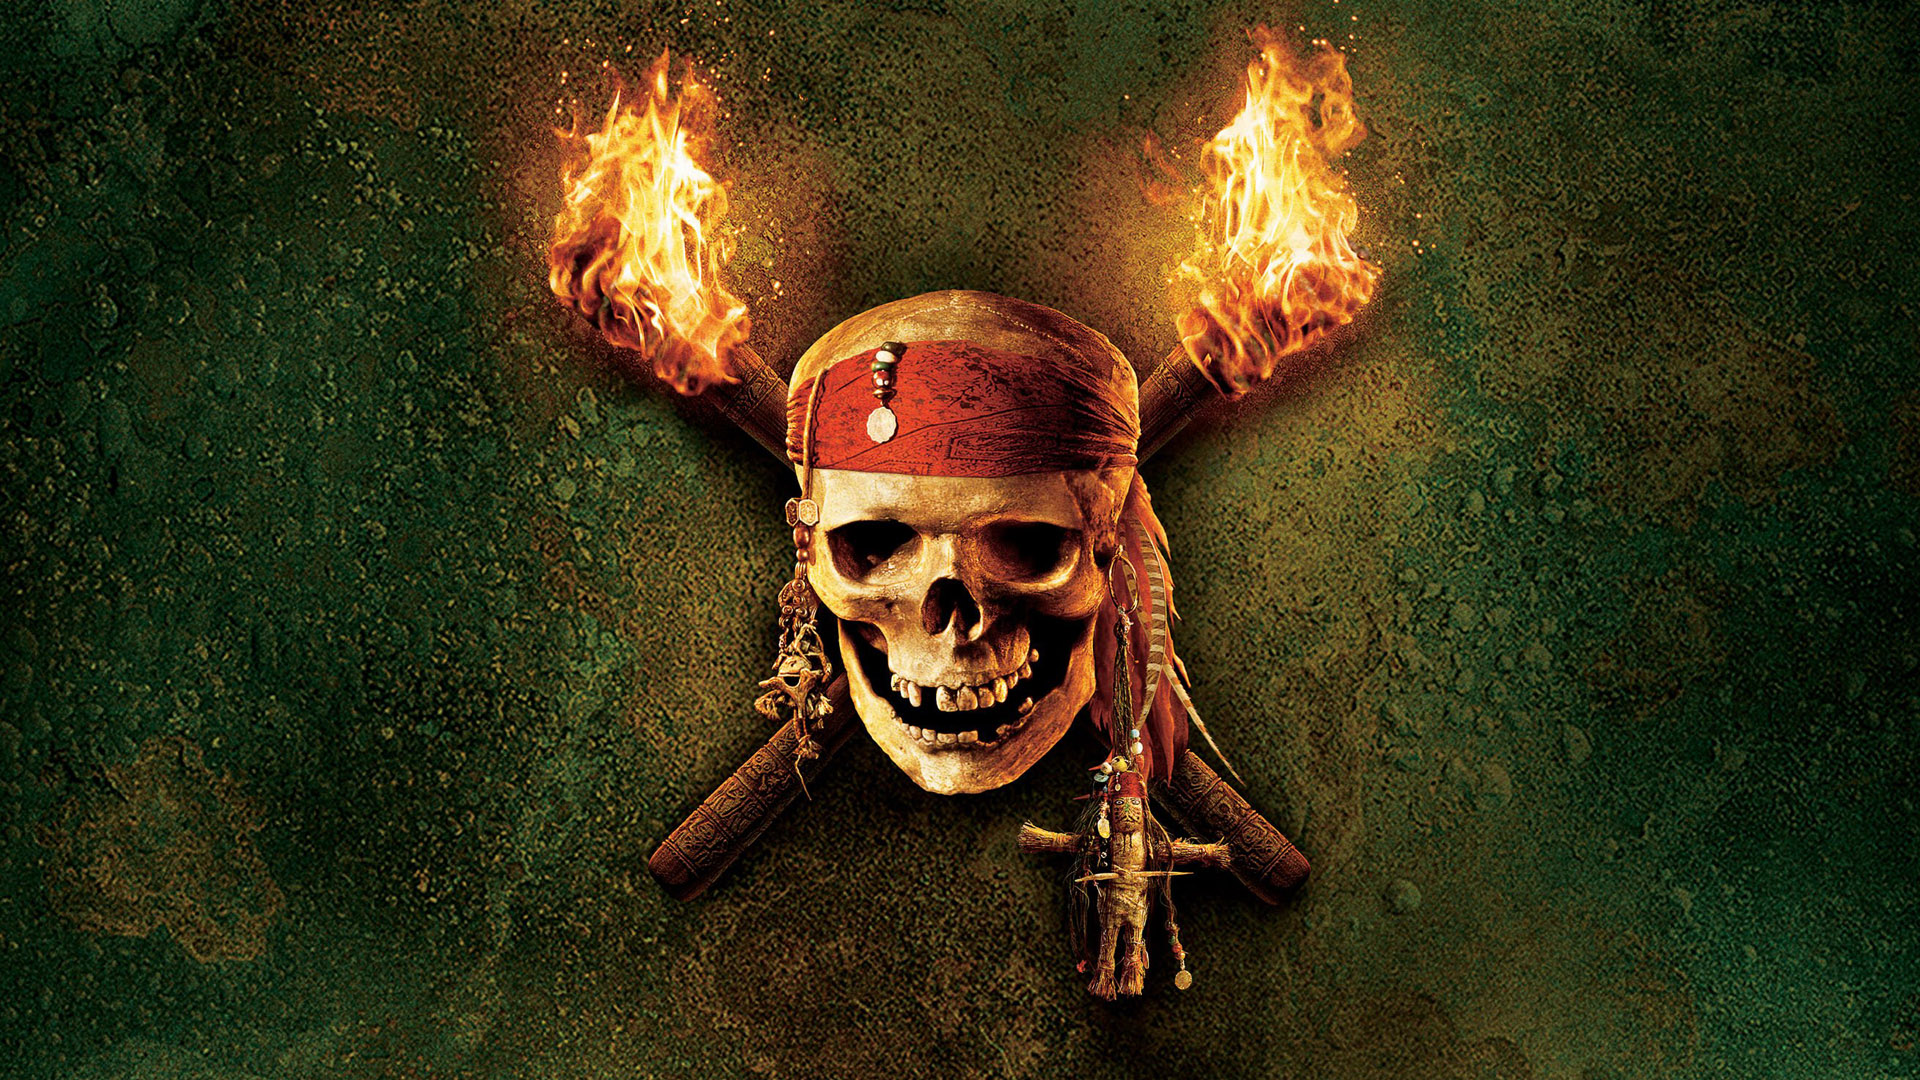 Skull Pirates Of The Caribbean Jack Sparrow Pirates Fire Head Band 1920x1080